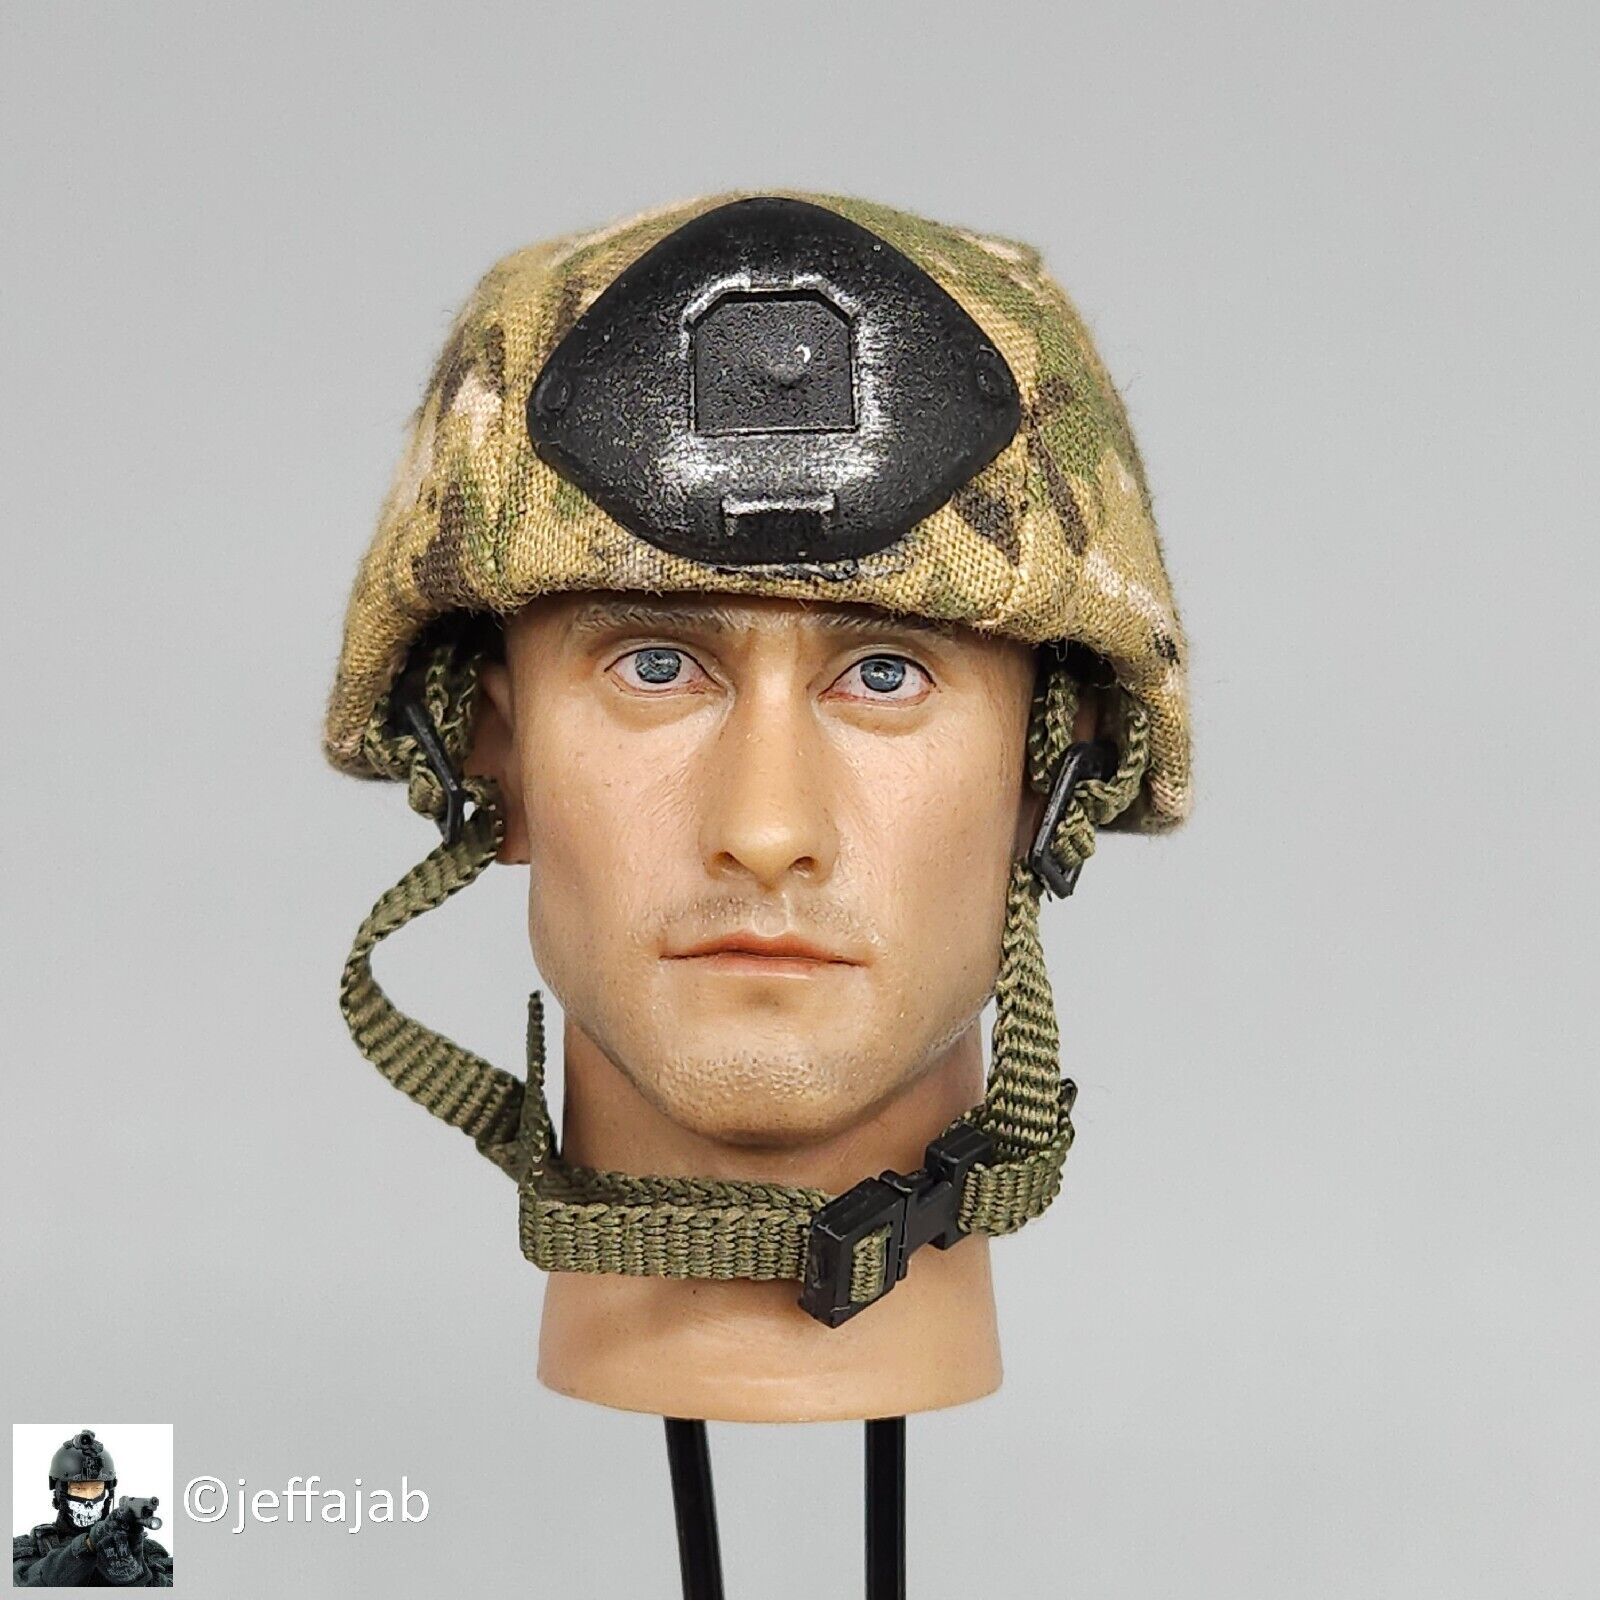 1:6 US Army Multicam MICH Helmet for 12" Figures